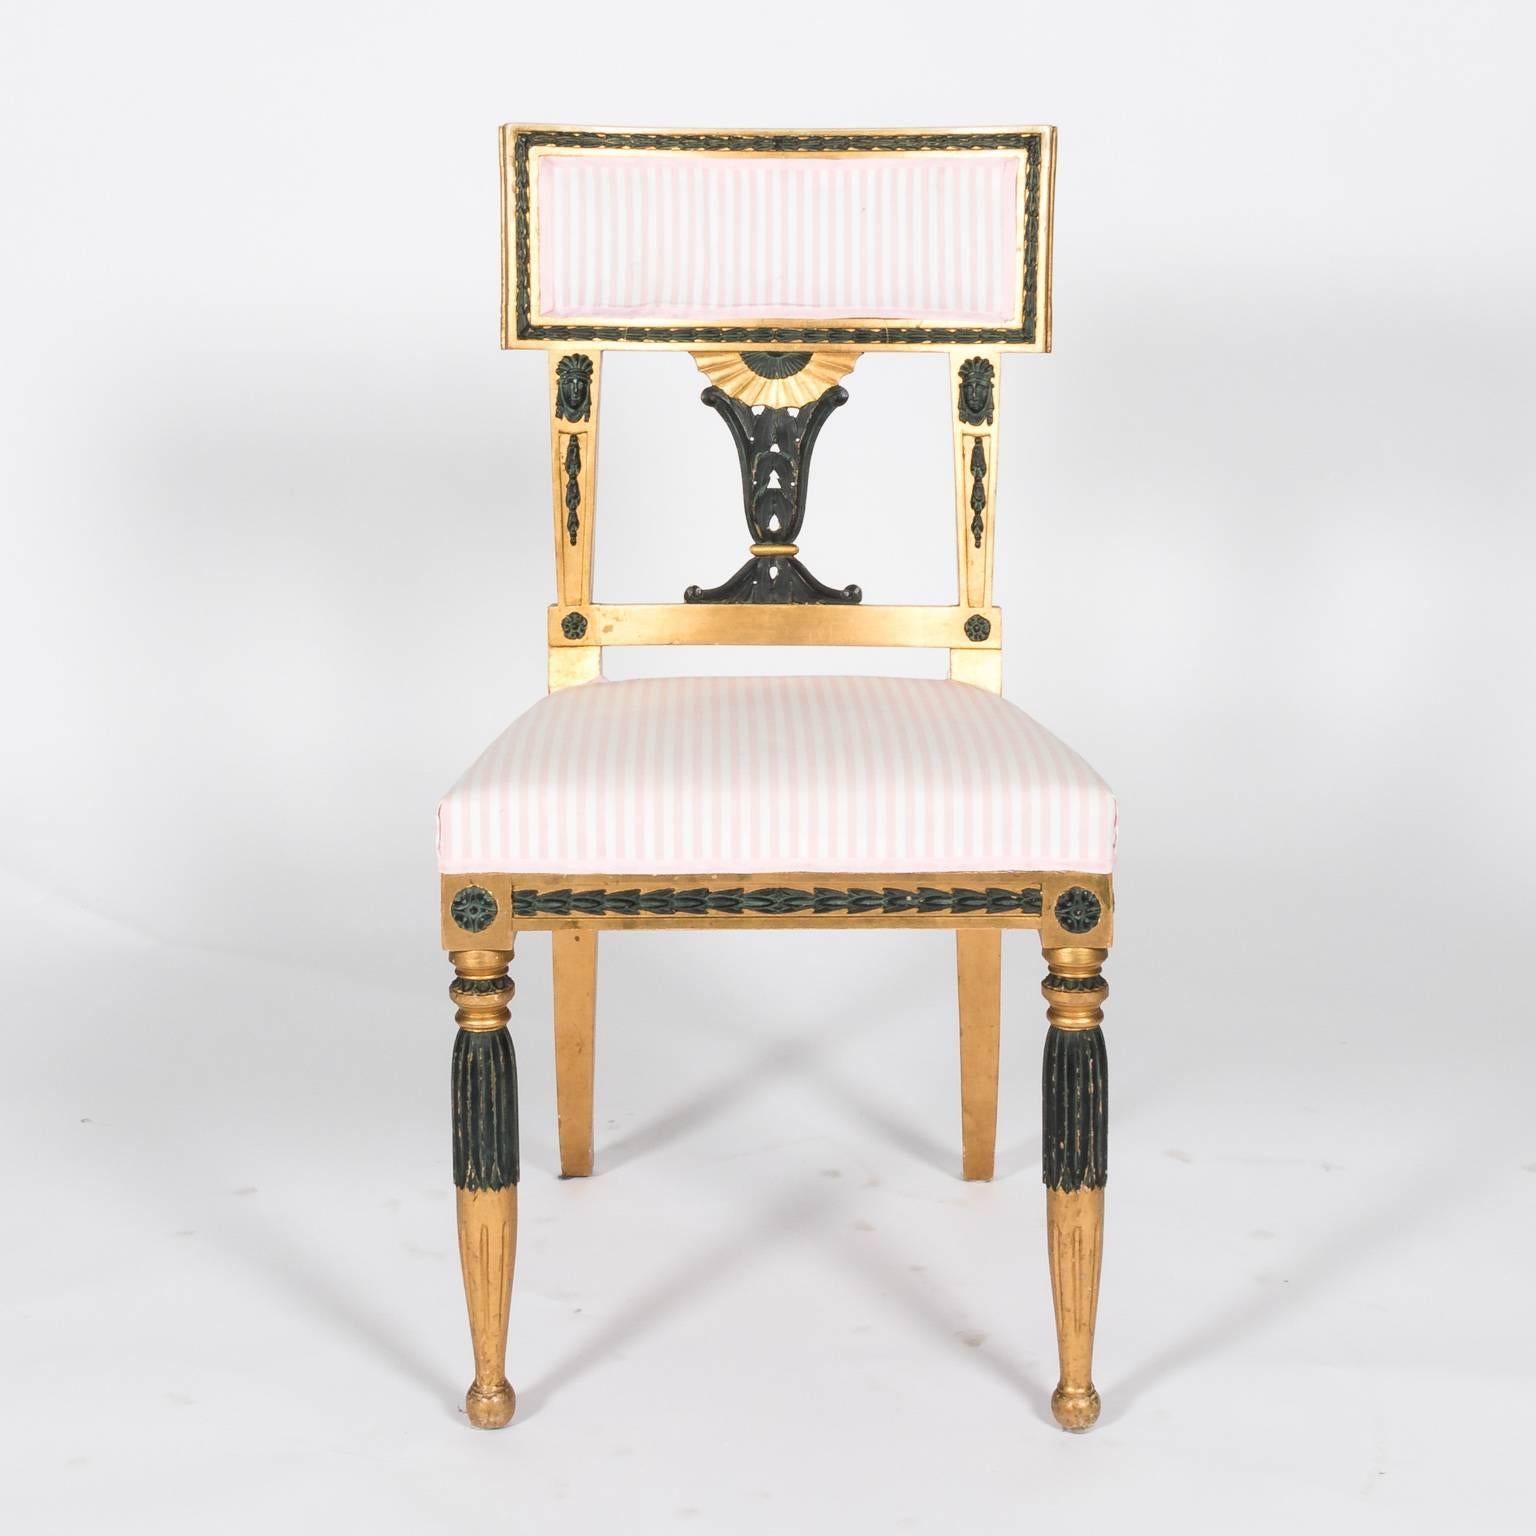 Gilt Pair of Gold and Black Painted Gustavian Side Chairs, circa 1900